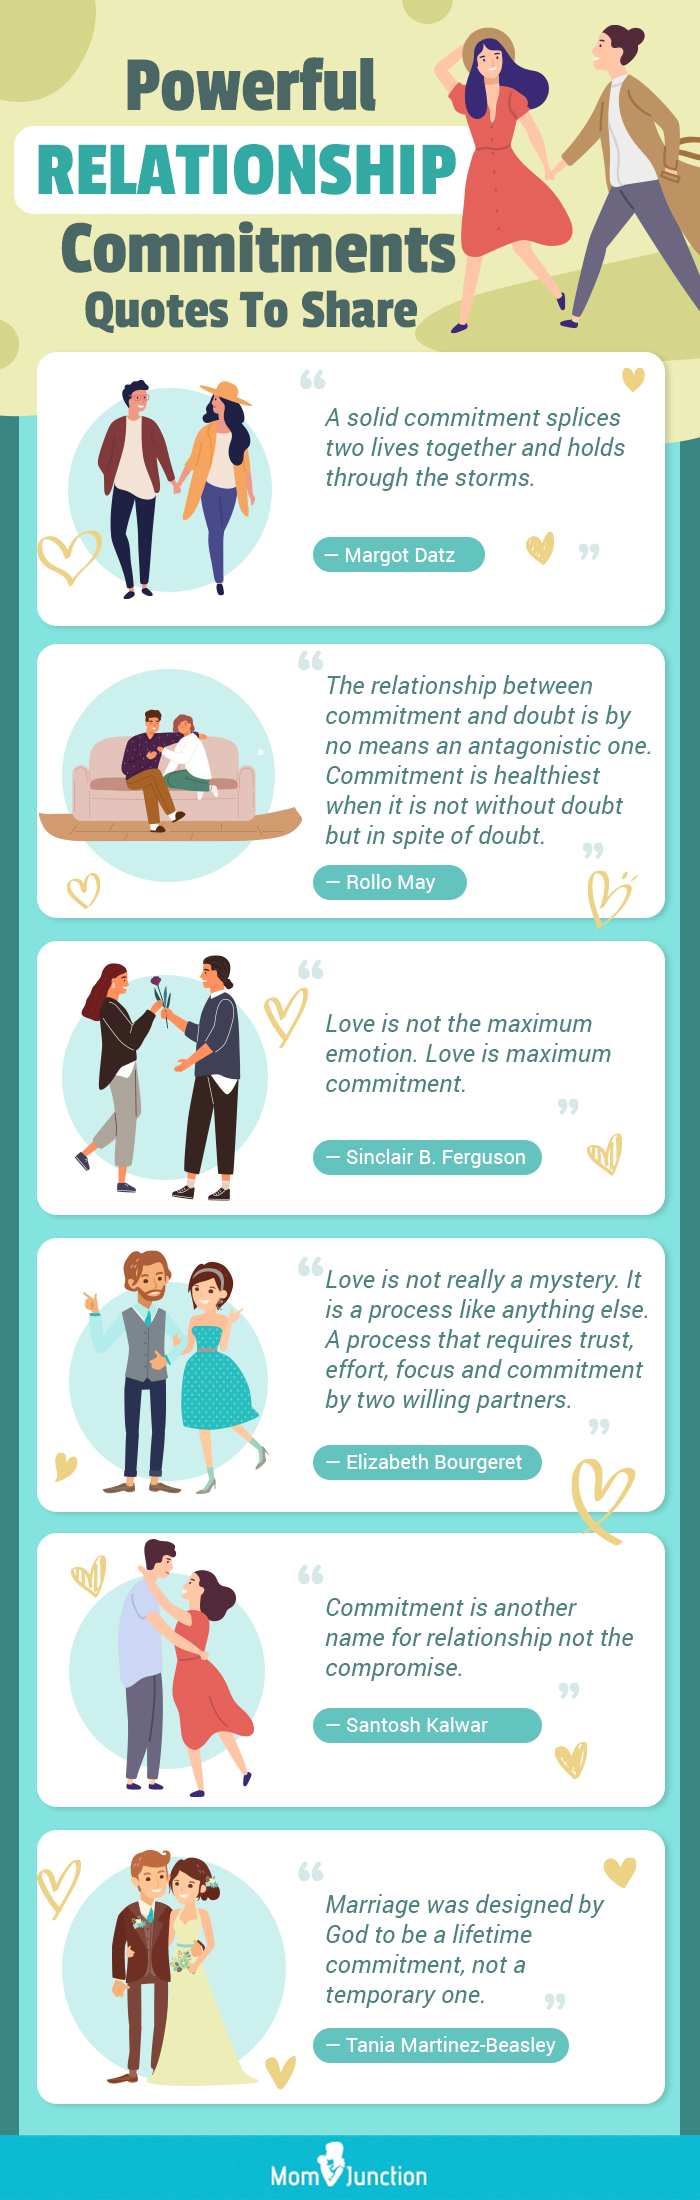 powerful relationship commitments quotes to share (infographic)